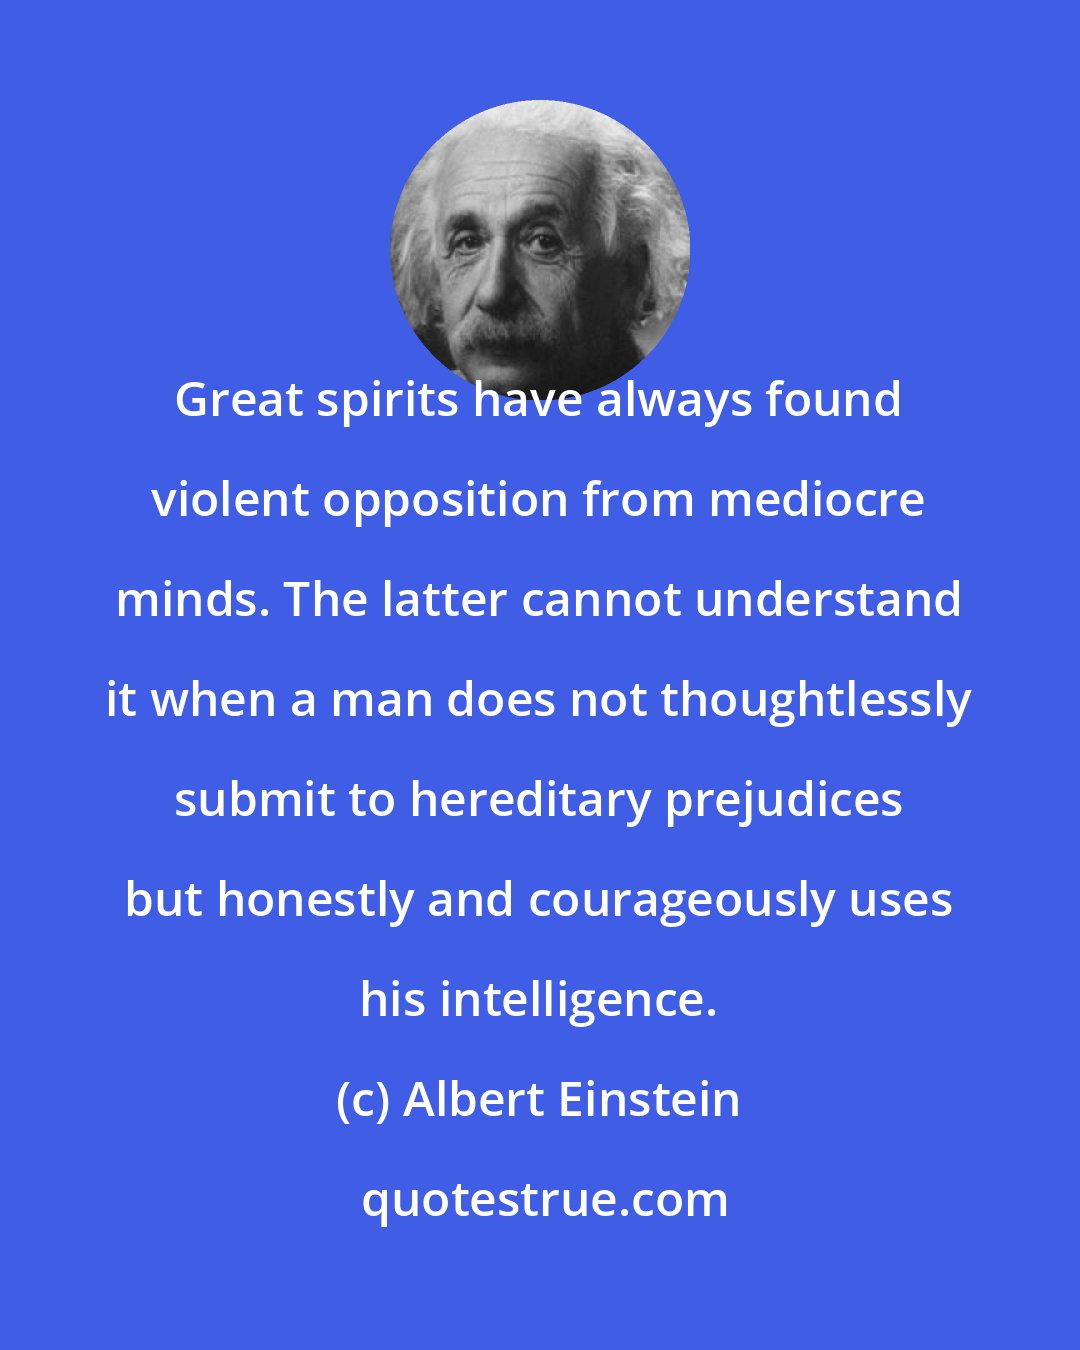 Albert Einstein: Great spirits have always found violent opposition from mediocre minds. The latter cannot understand it when a man does not thoughtlessly submit to hereditary prejudices but honestly and courageously uses his intelligence.